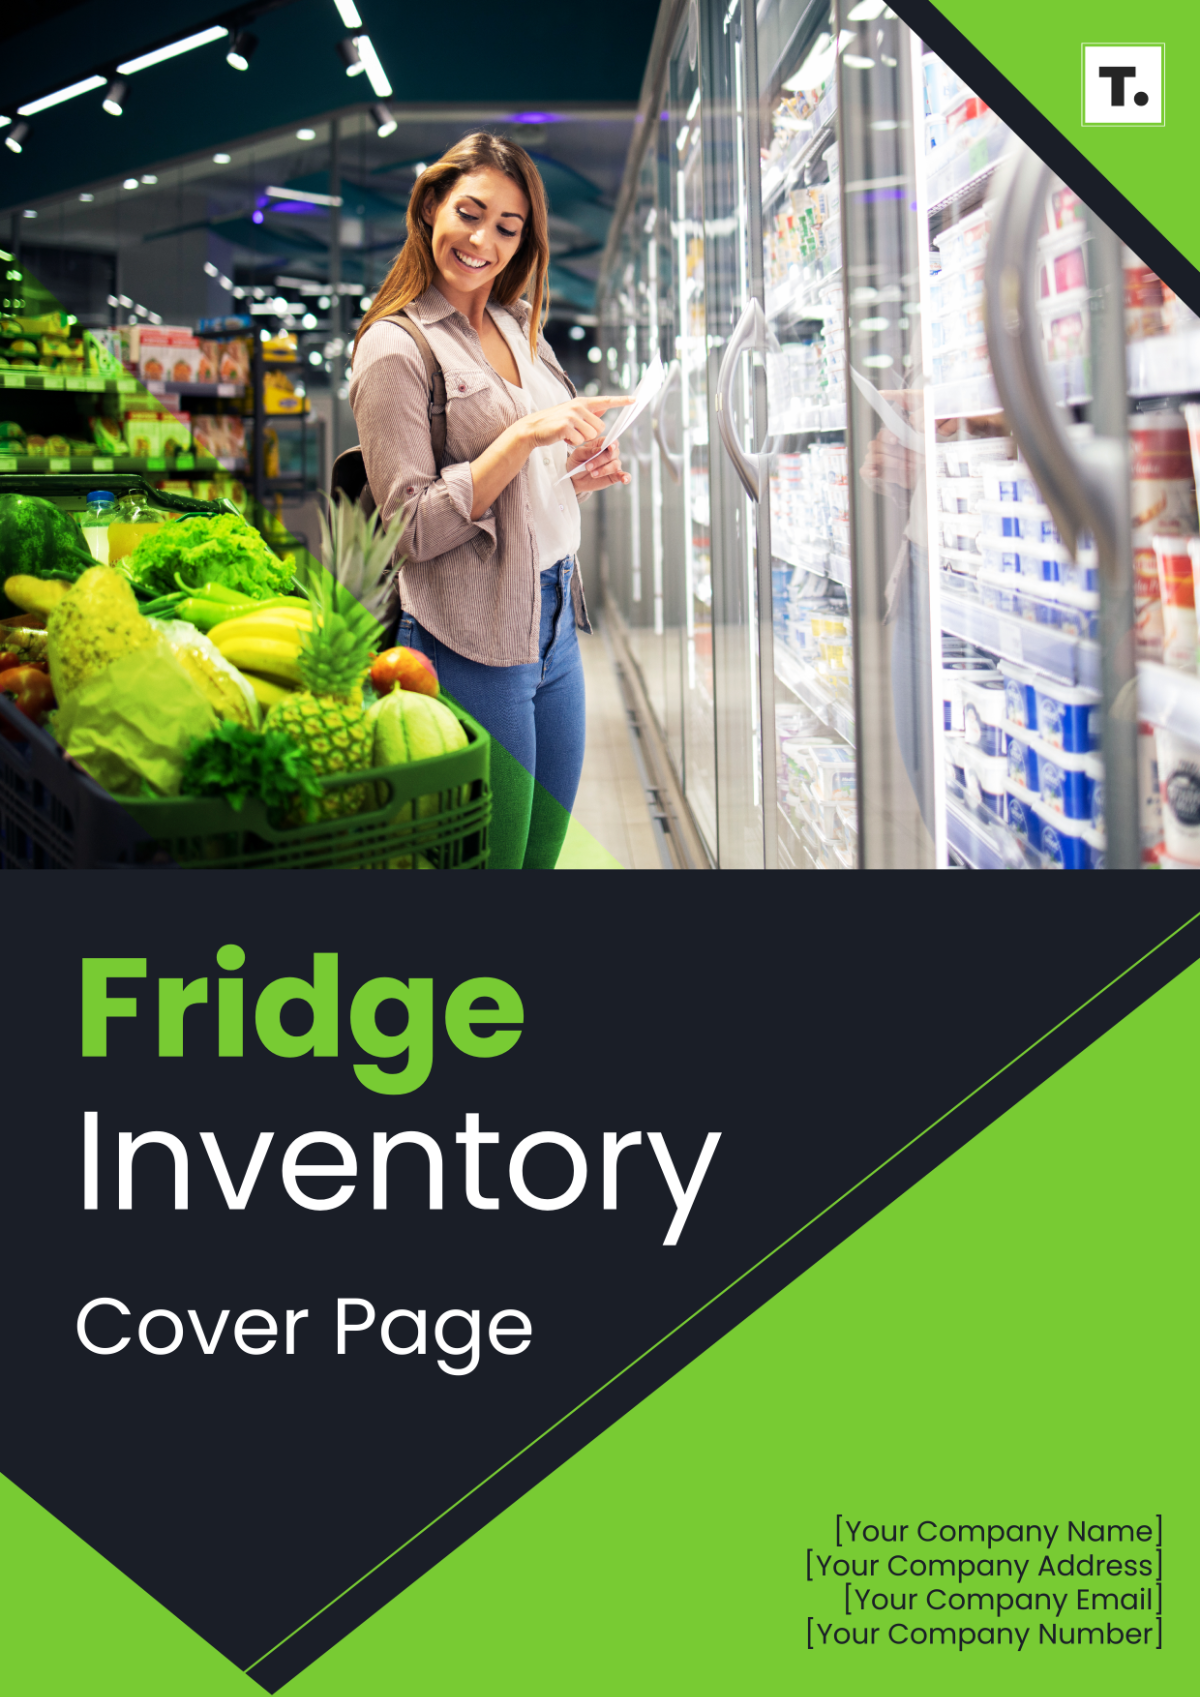 Fridge Inventory Cover Page